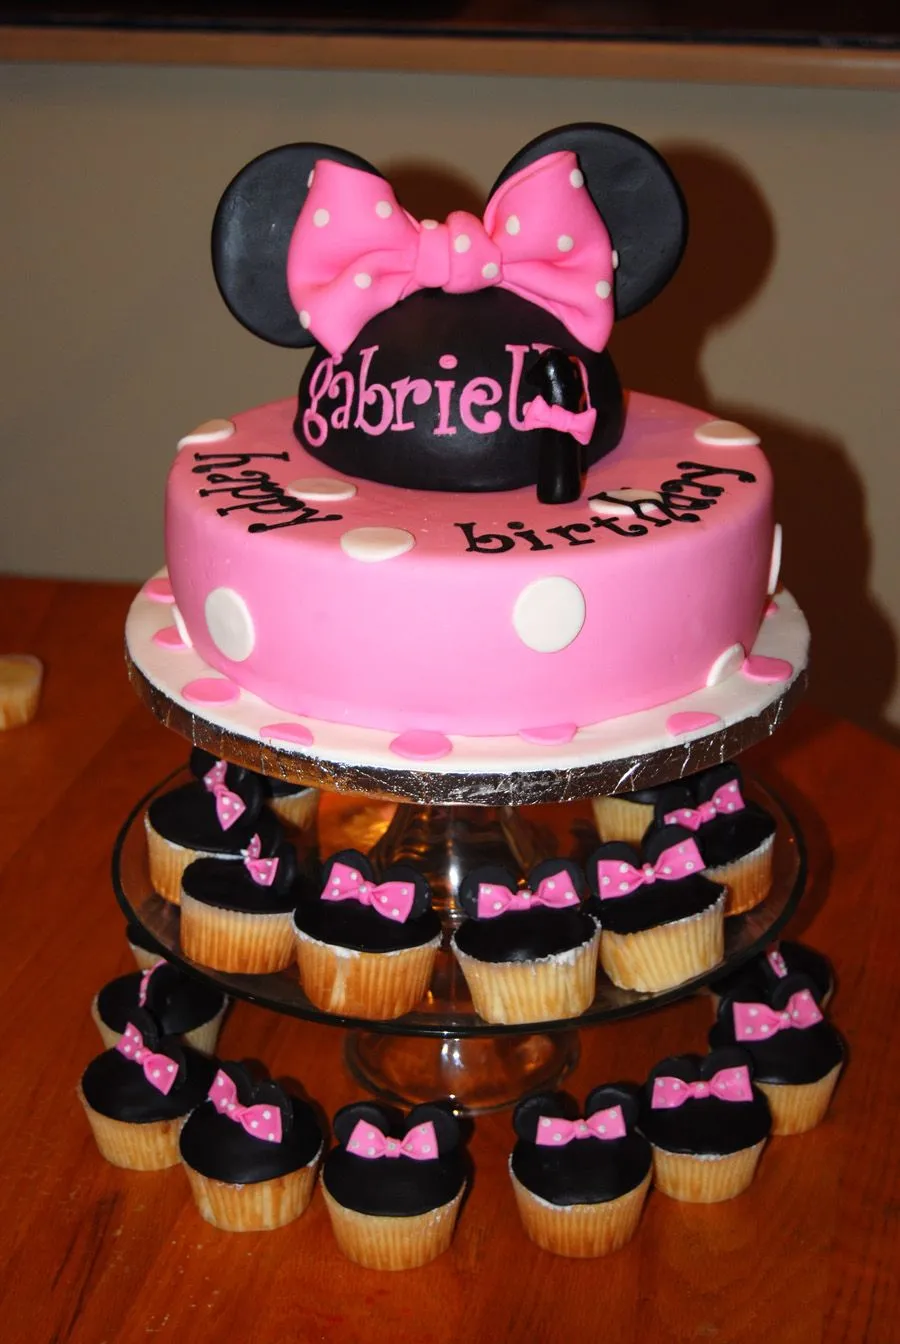 Leelees Cake-abilities: Minnie Mouse Cupcake Tower